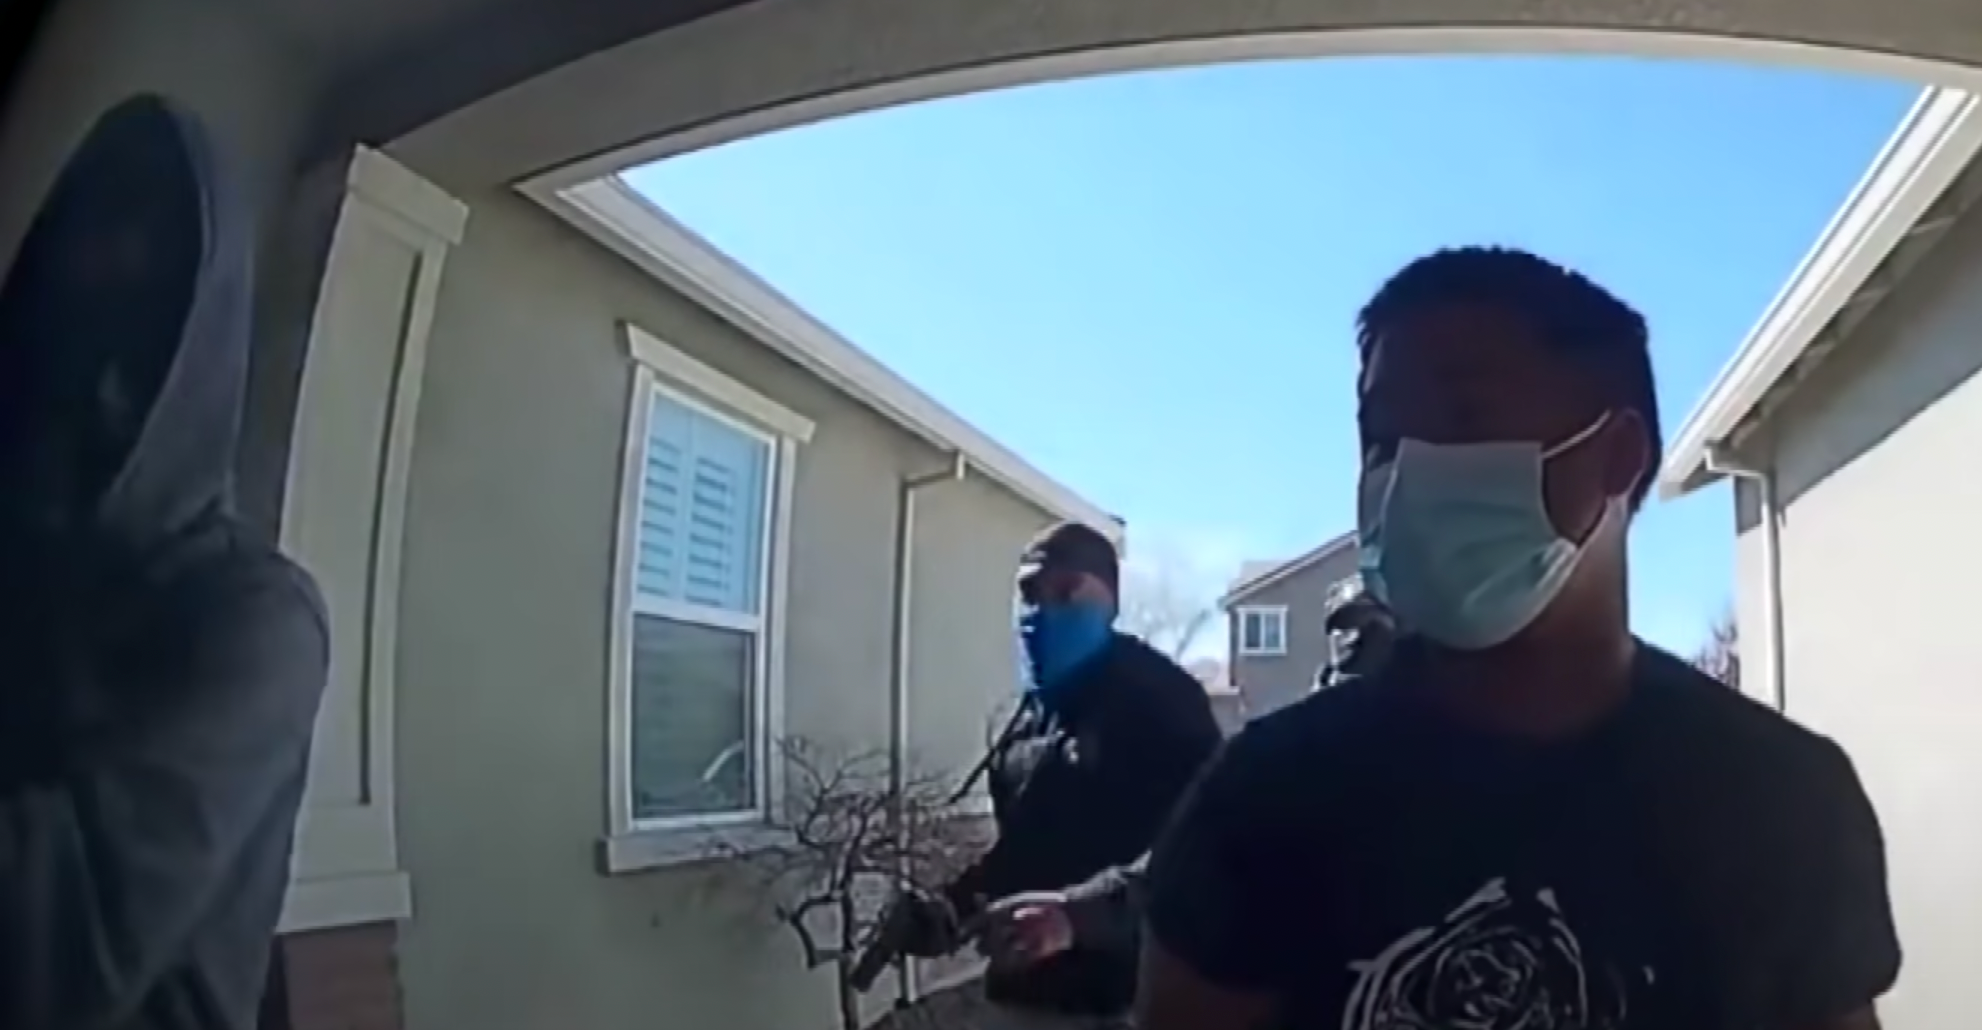 Good Guy With A Gun: Brazen Home Invasion in Stockton, California by Fake Candy Seller